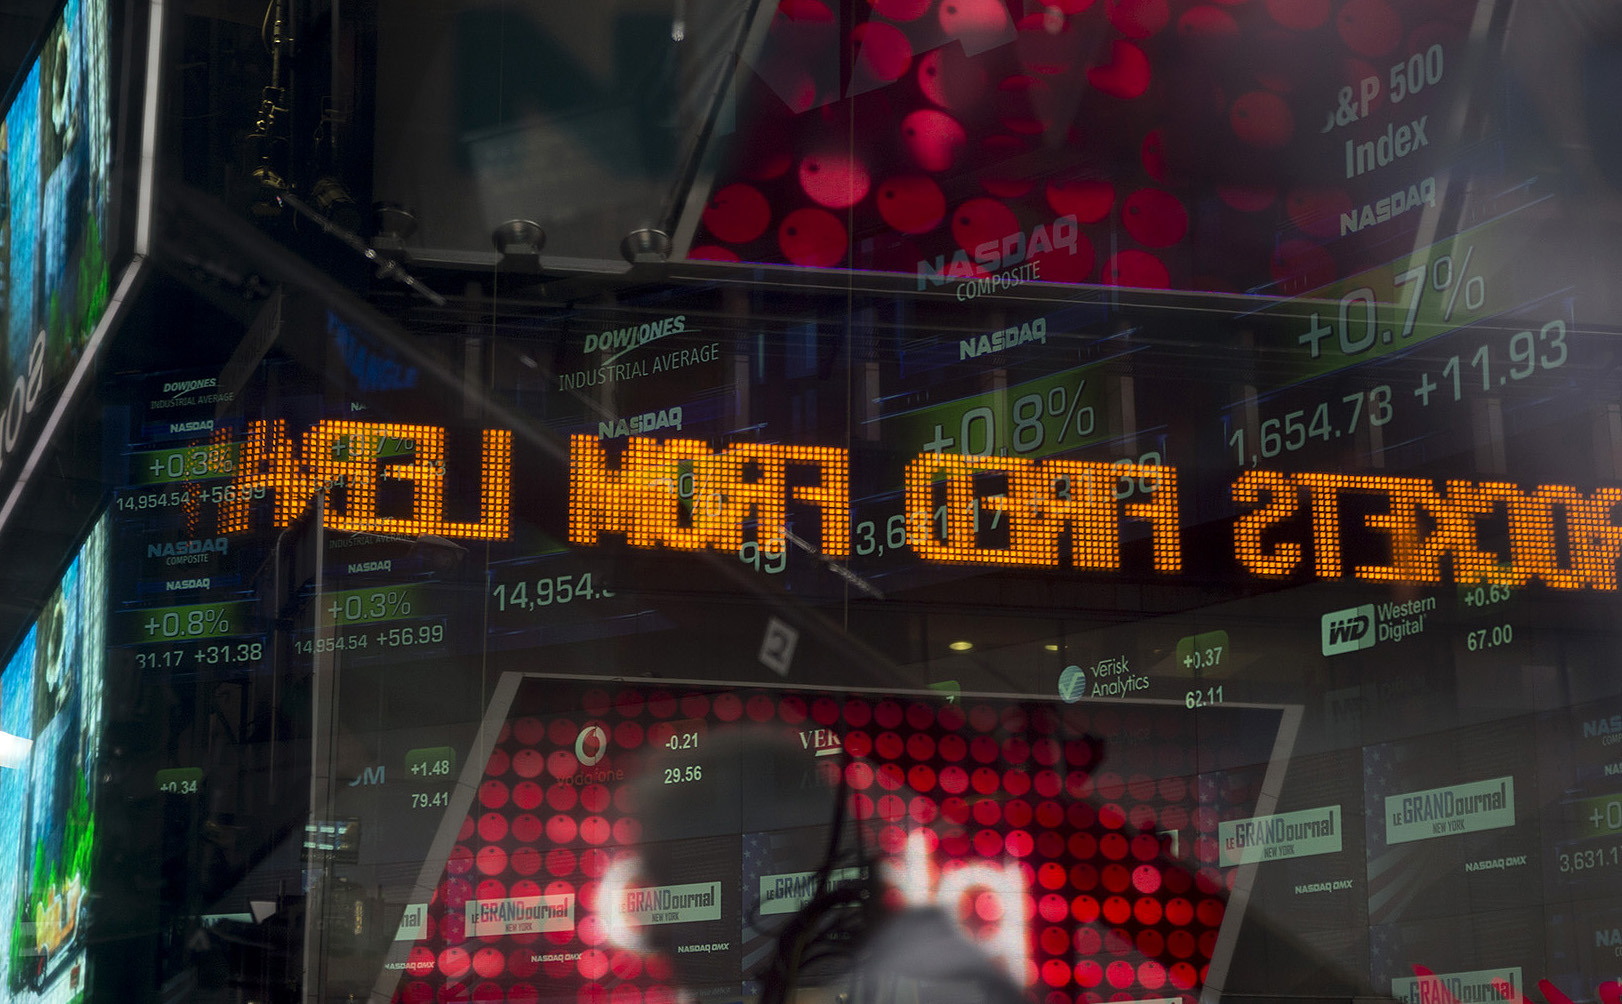 Monitors displaying market information are seen through a window in Times Square in New York.
